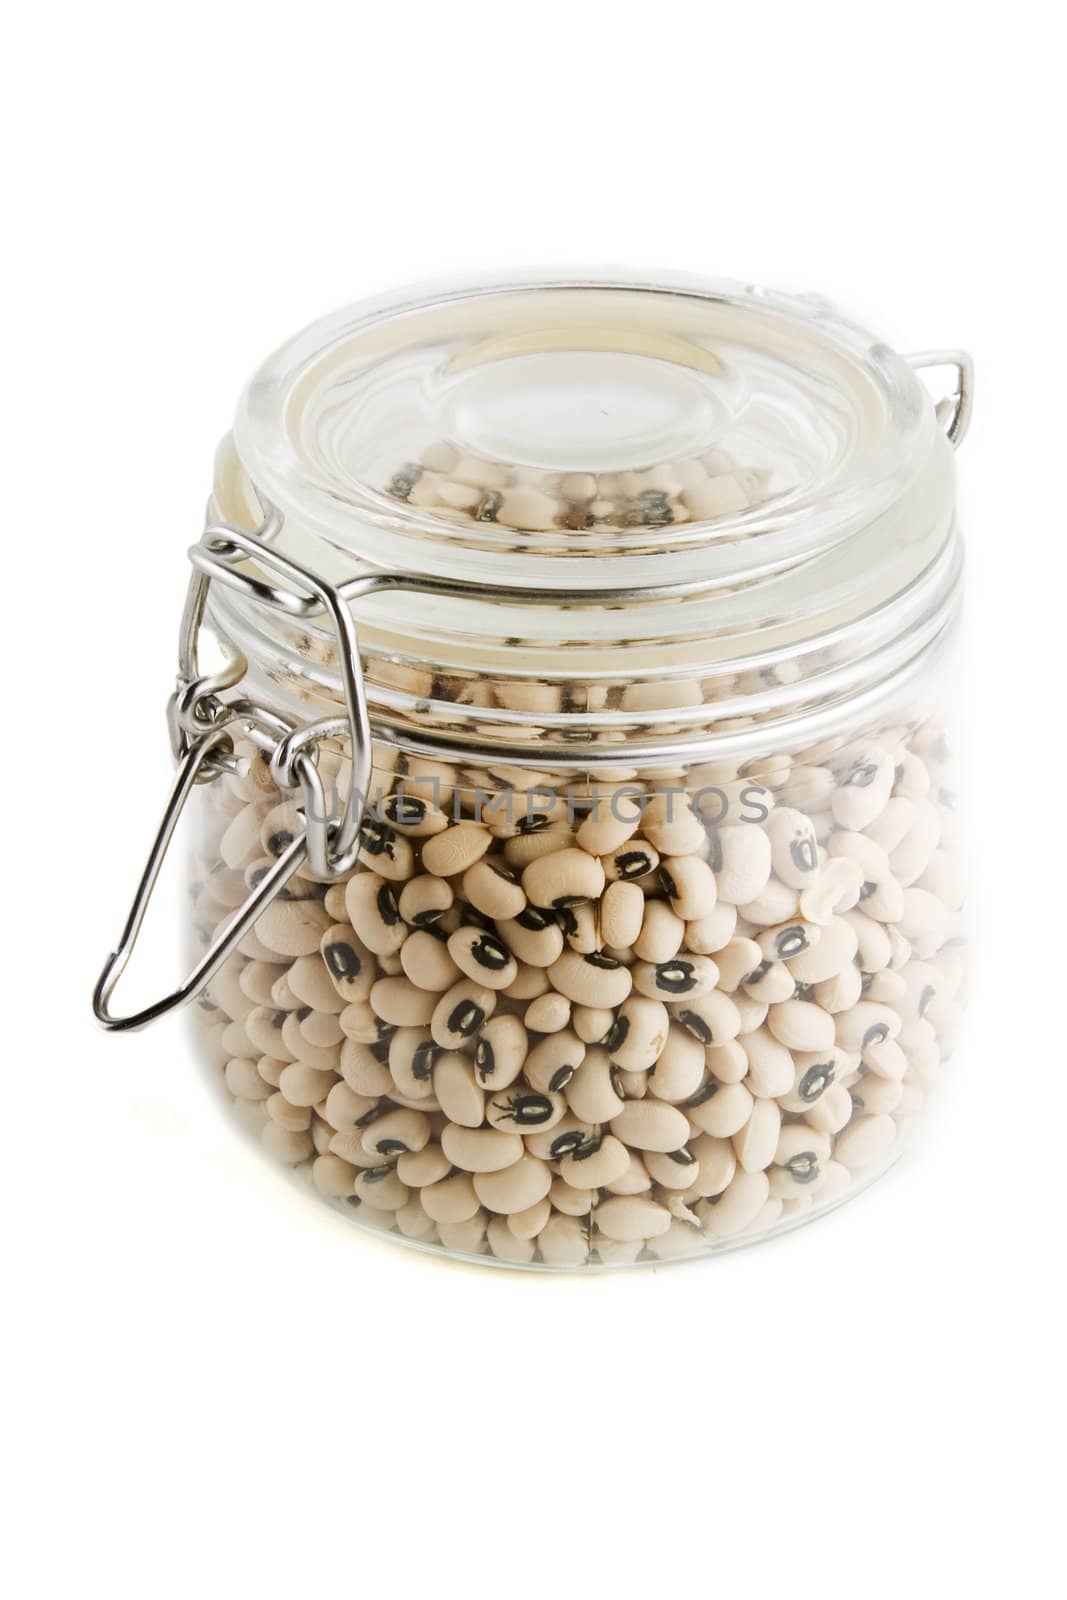 Black eyed peas in a glass container